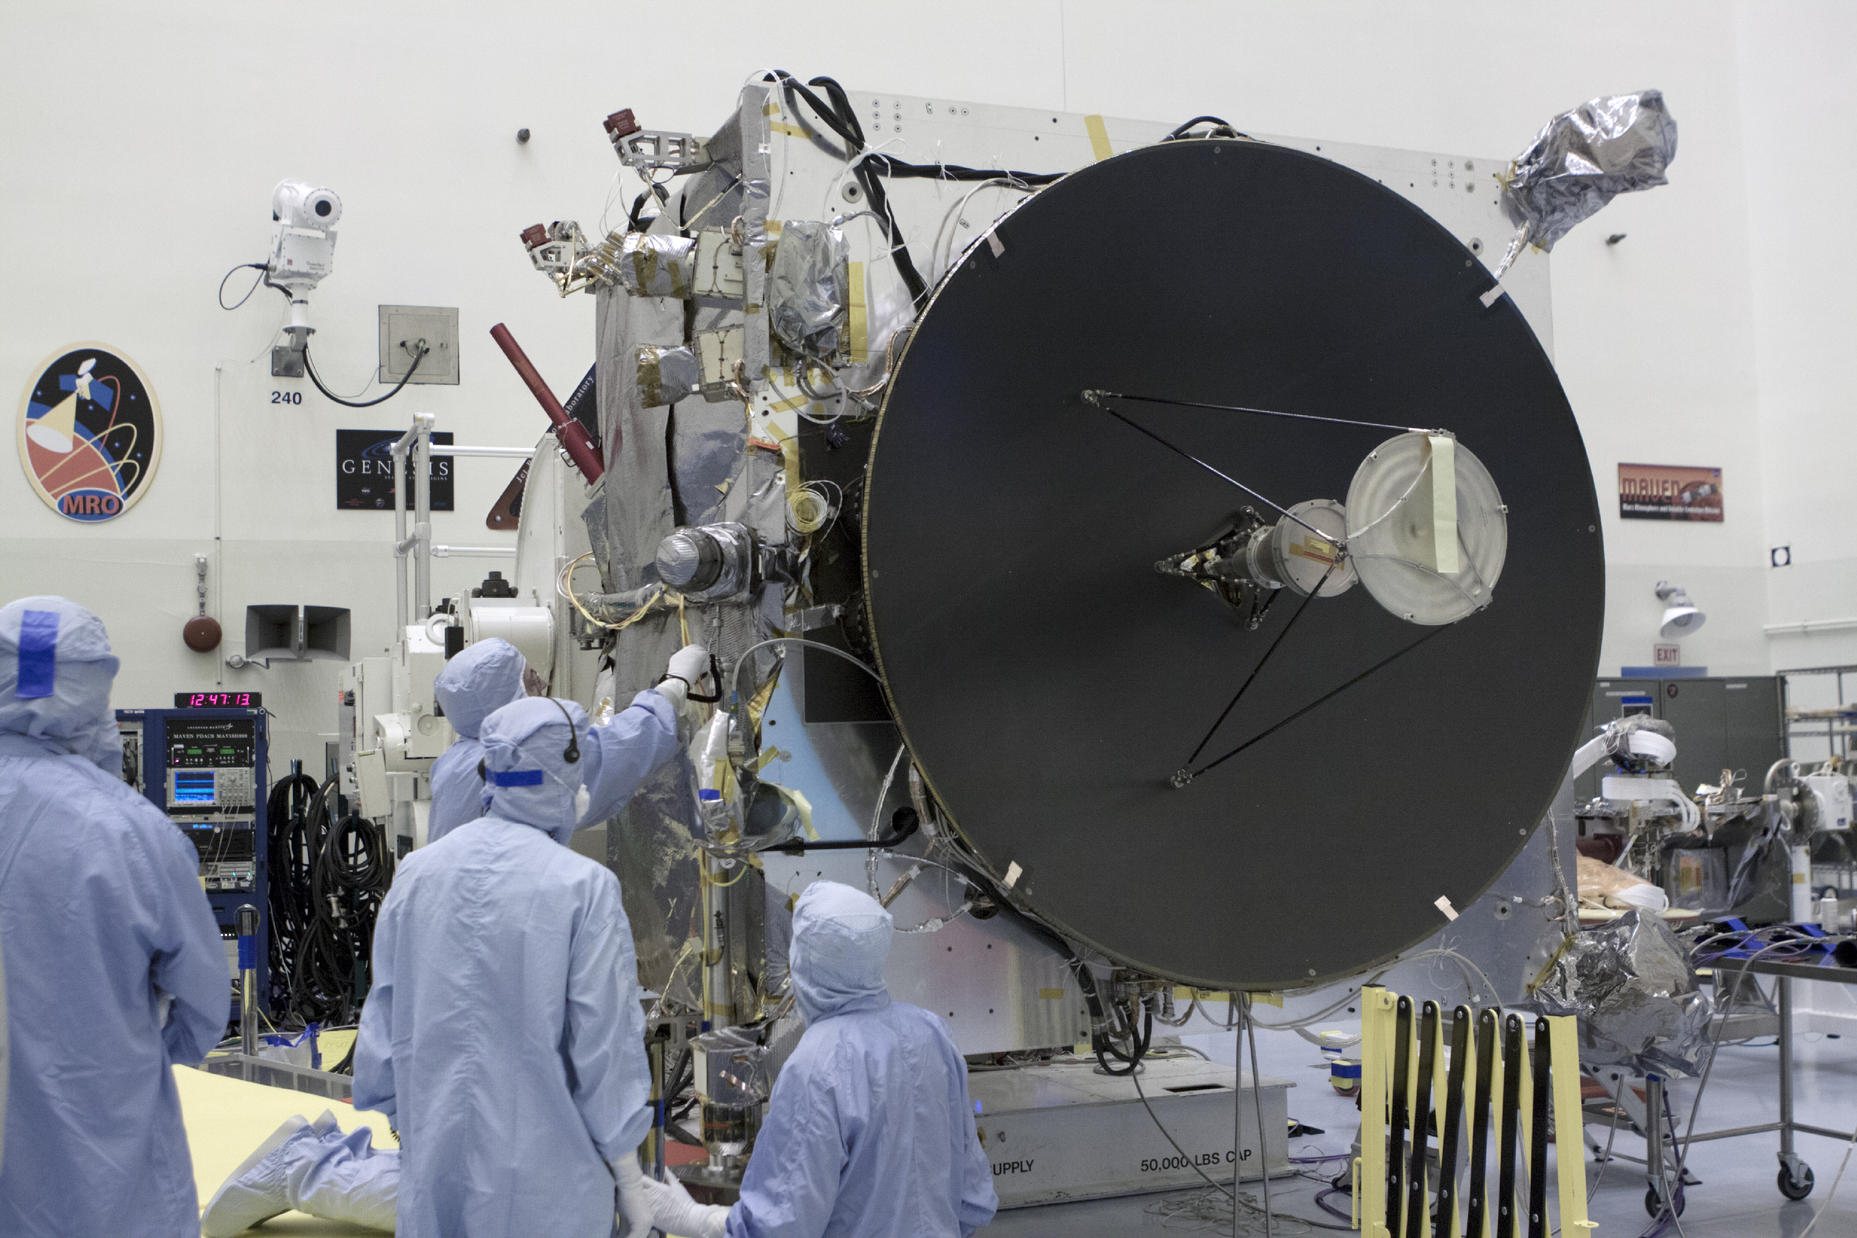 Engineers work on the MAVEN spacecraft, which is dominated by the high-gain antenna that is crucial to communications with NASA's Deep Space Network.